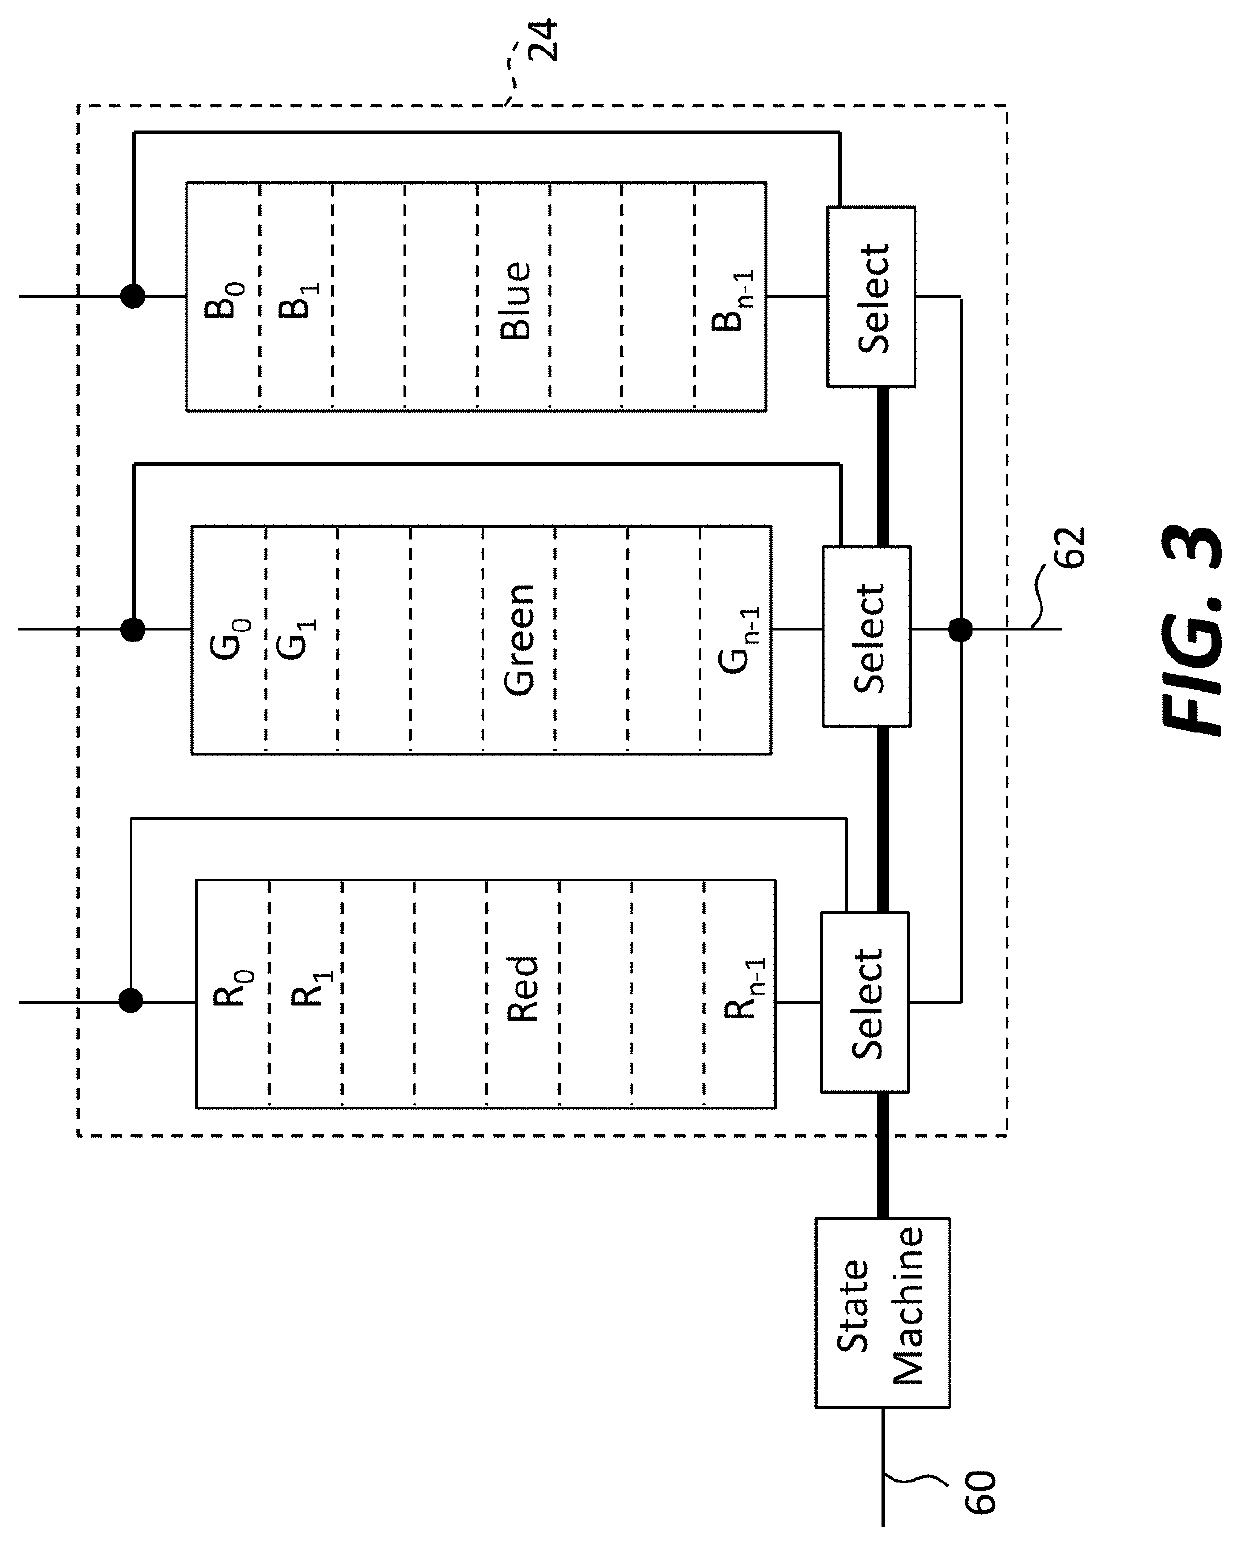 Digital-drive pulse-width-modulated output system